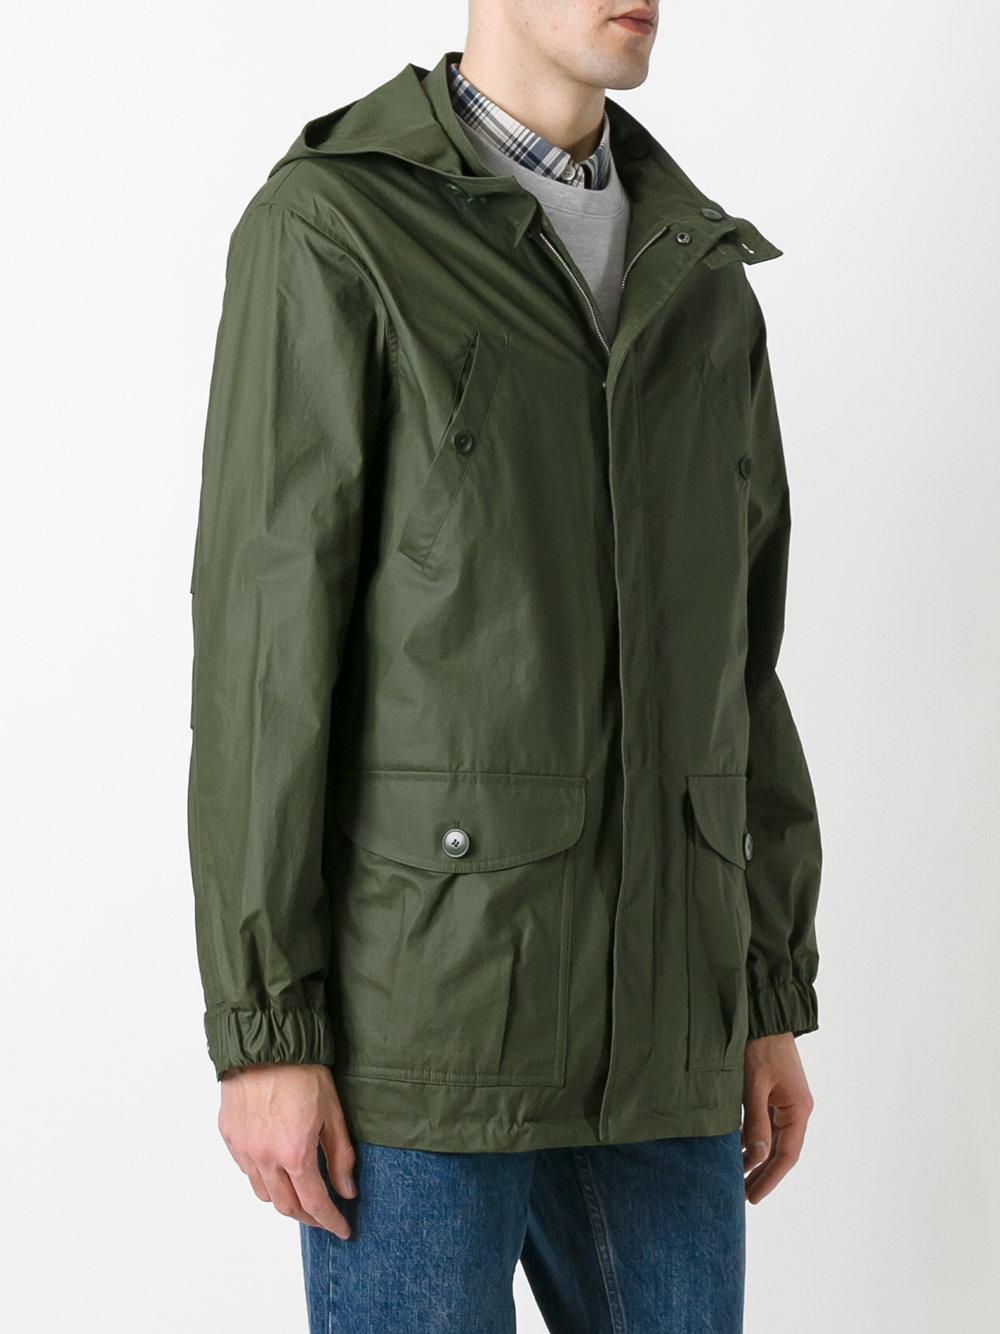 Lyst - A.P.C. Lightweight Jacket in Green for Men